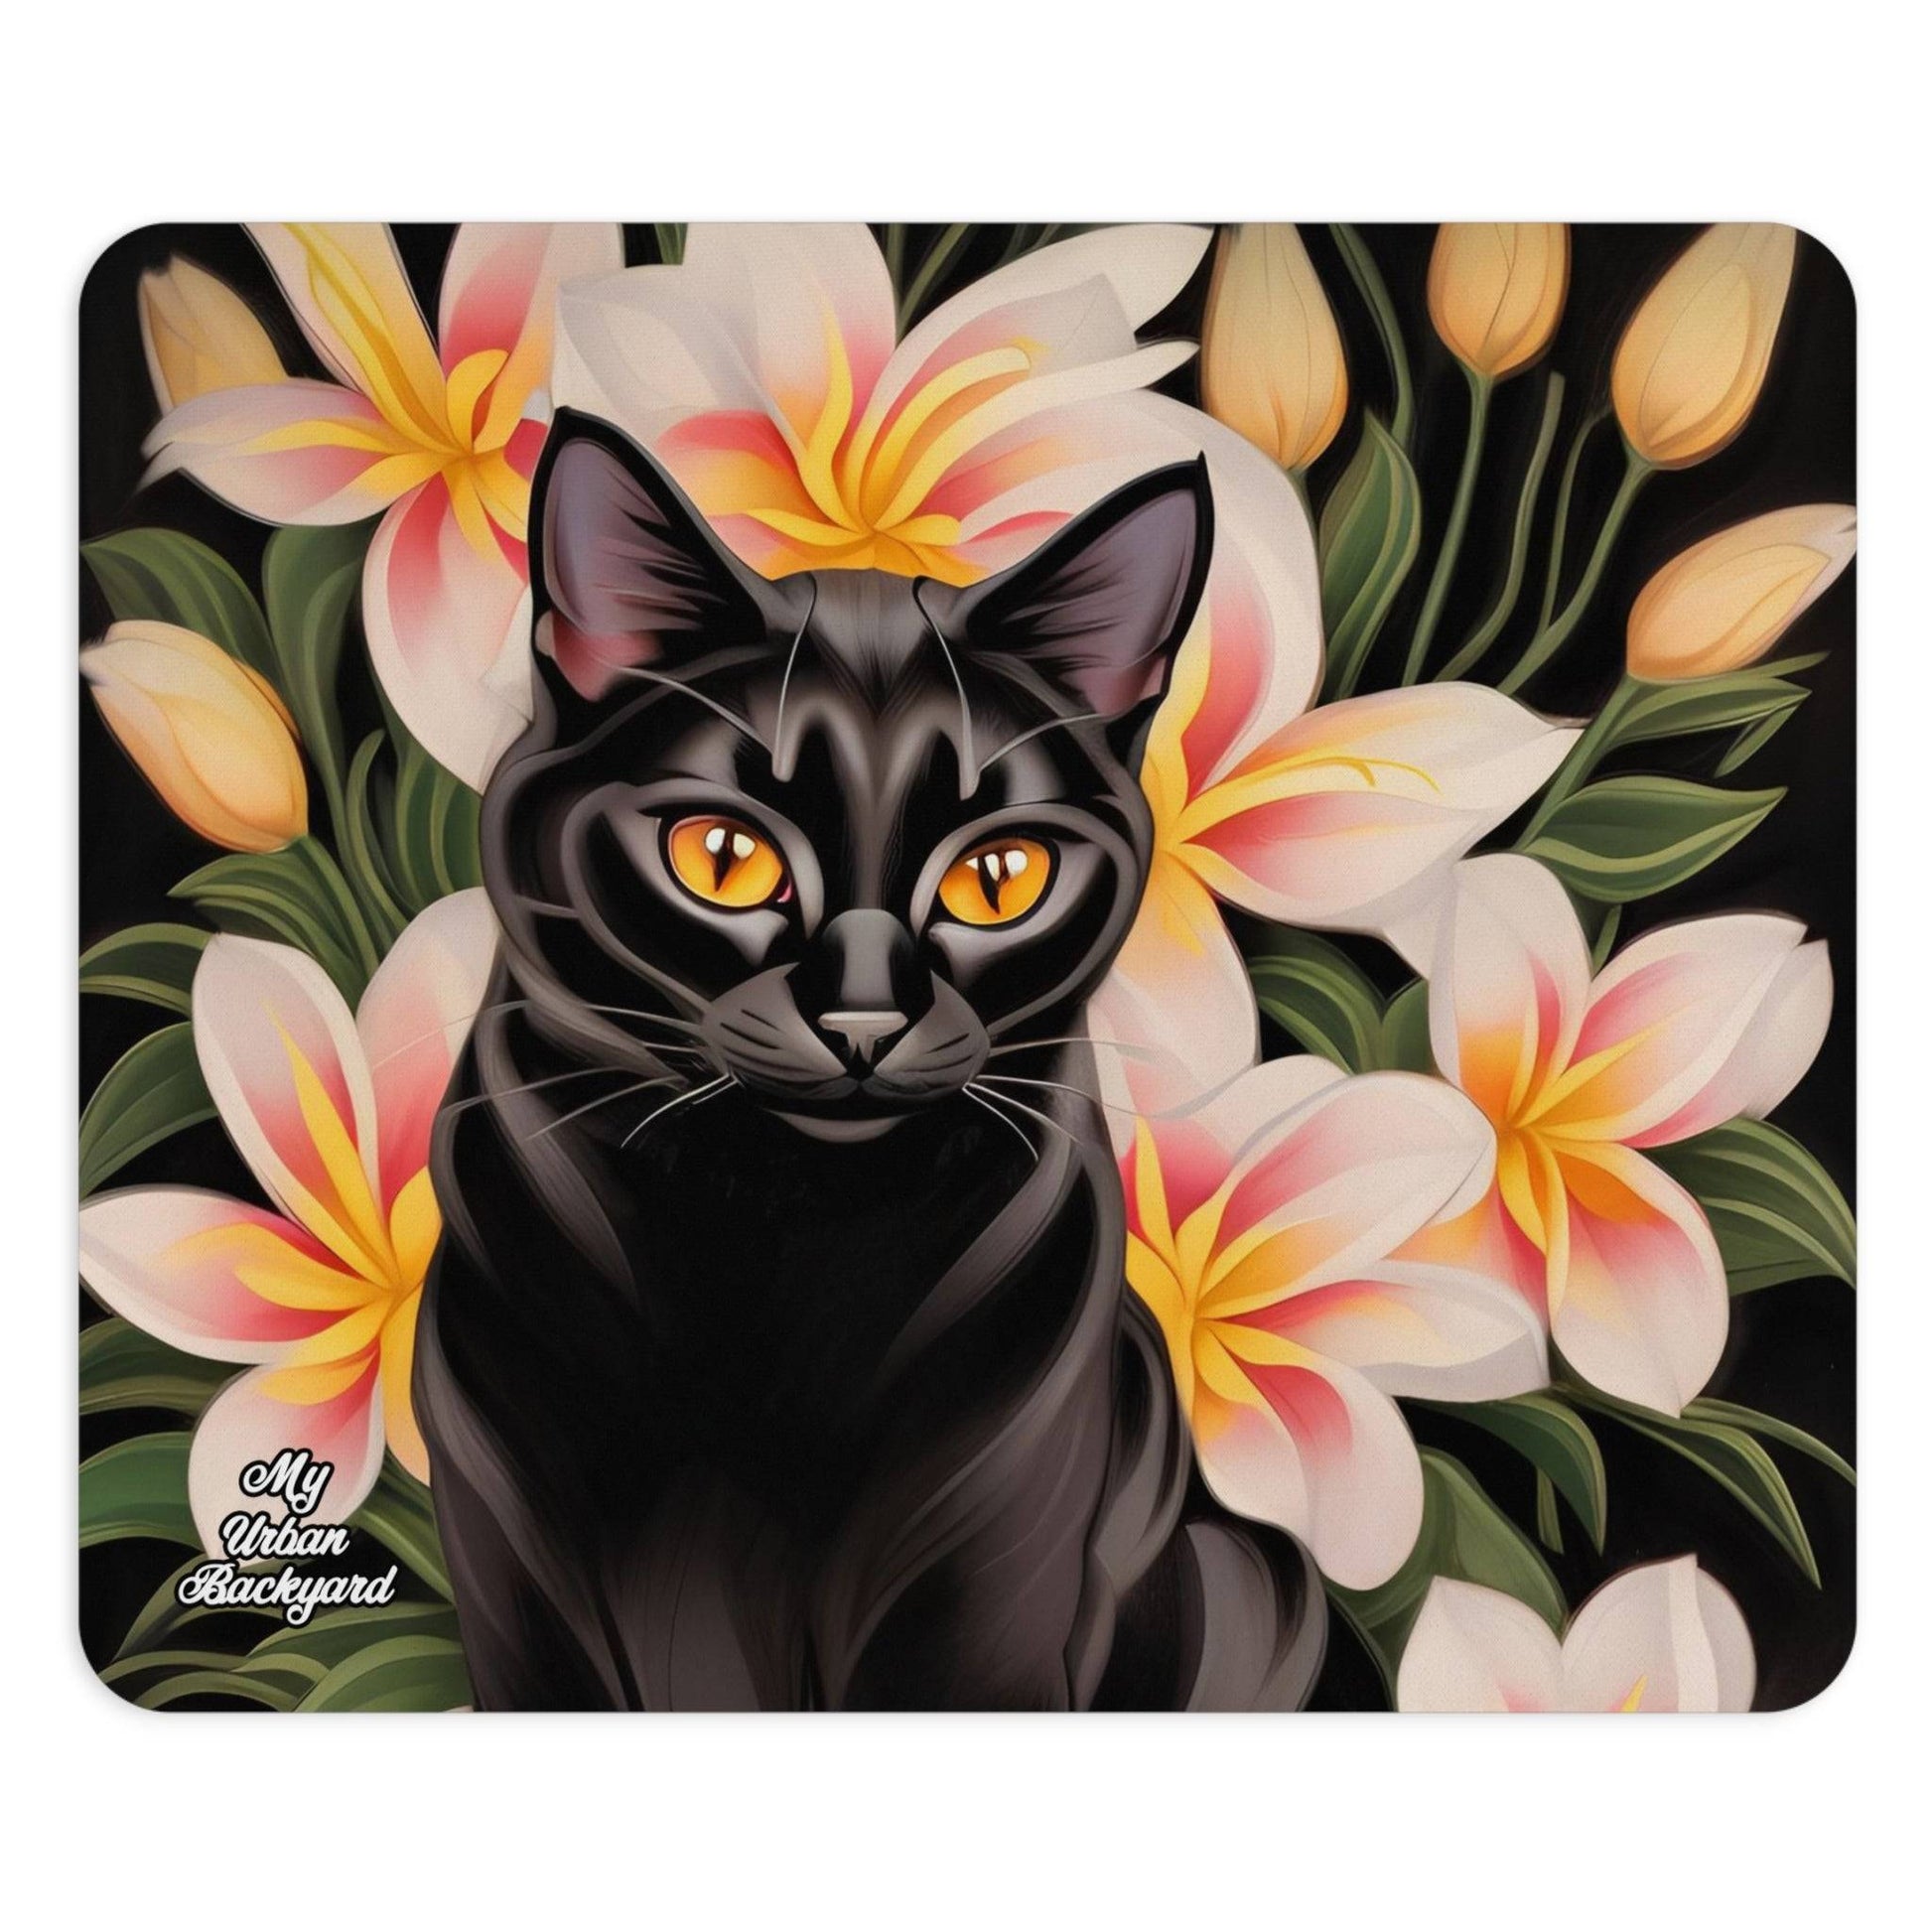 Computer Mouse Pad, Non-slip rubber bottom, Silky Black Cat w Flowers